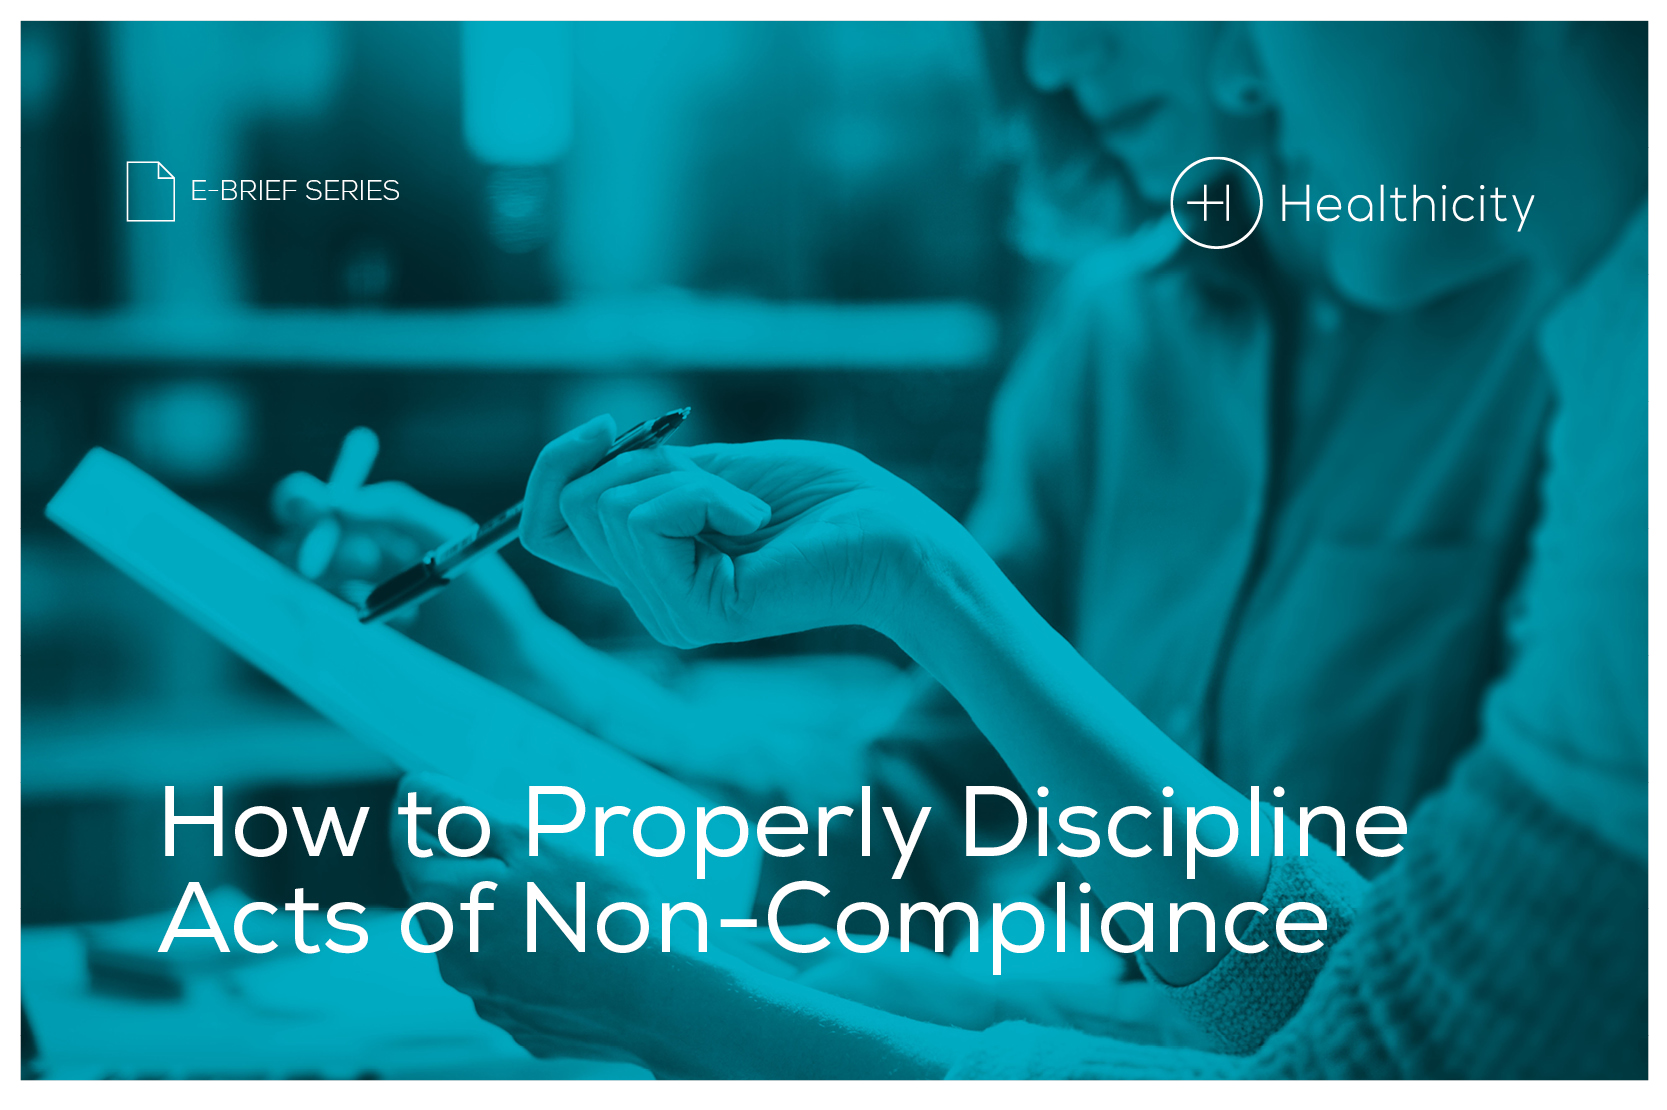 Download 'How to Properly Discipline Acts of Non-Compliance' eBrief